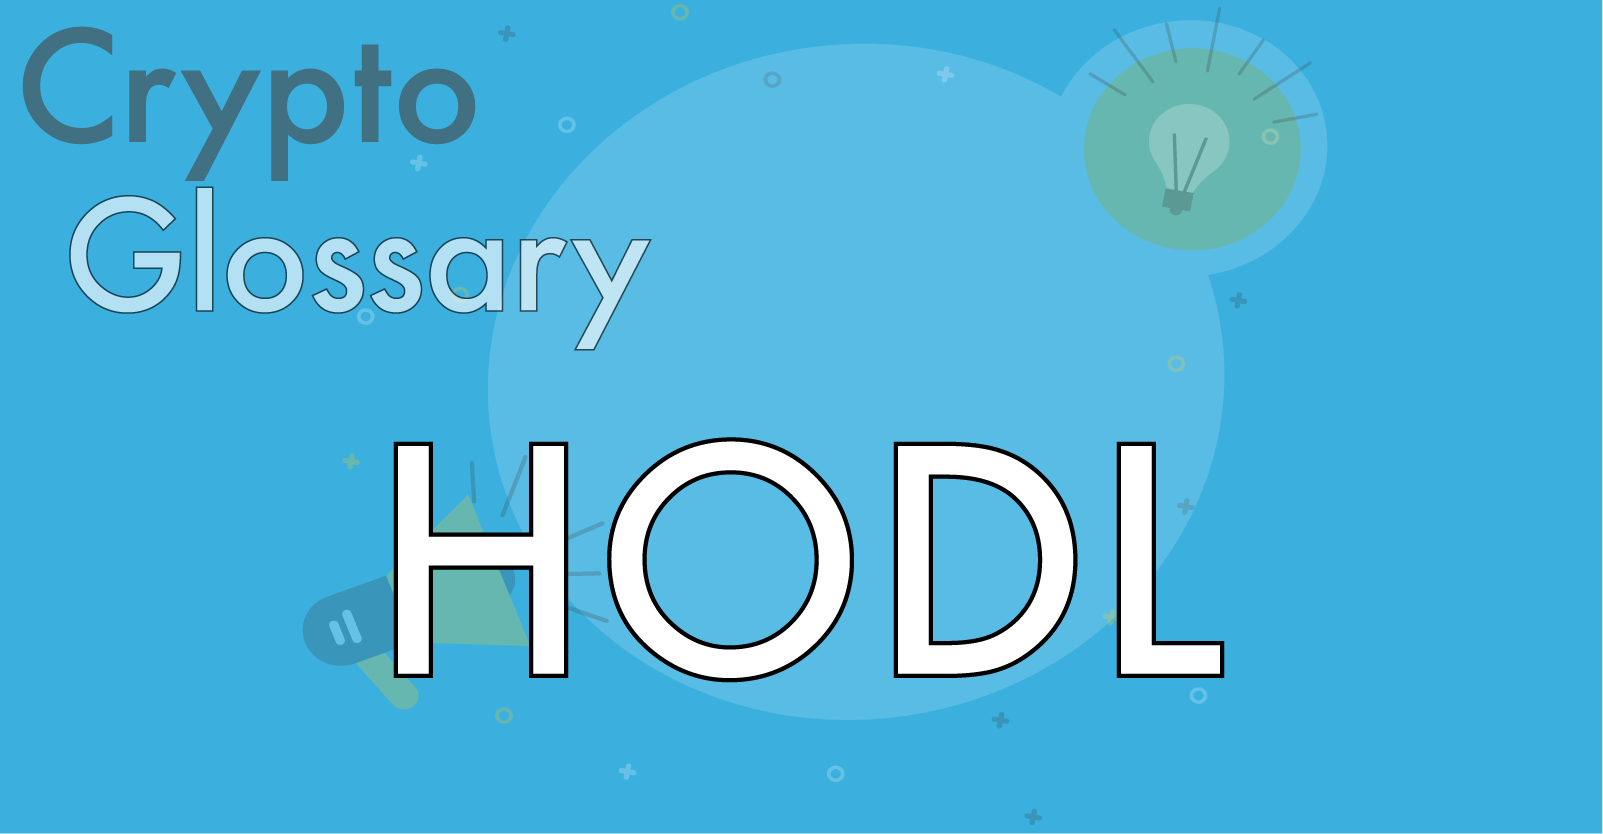 What is HODL and why has it grown in popularity?